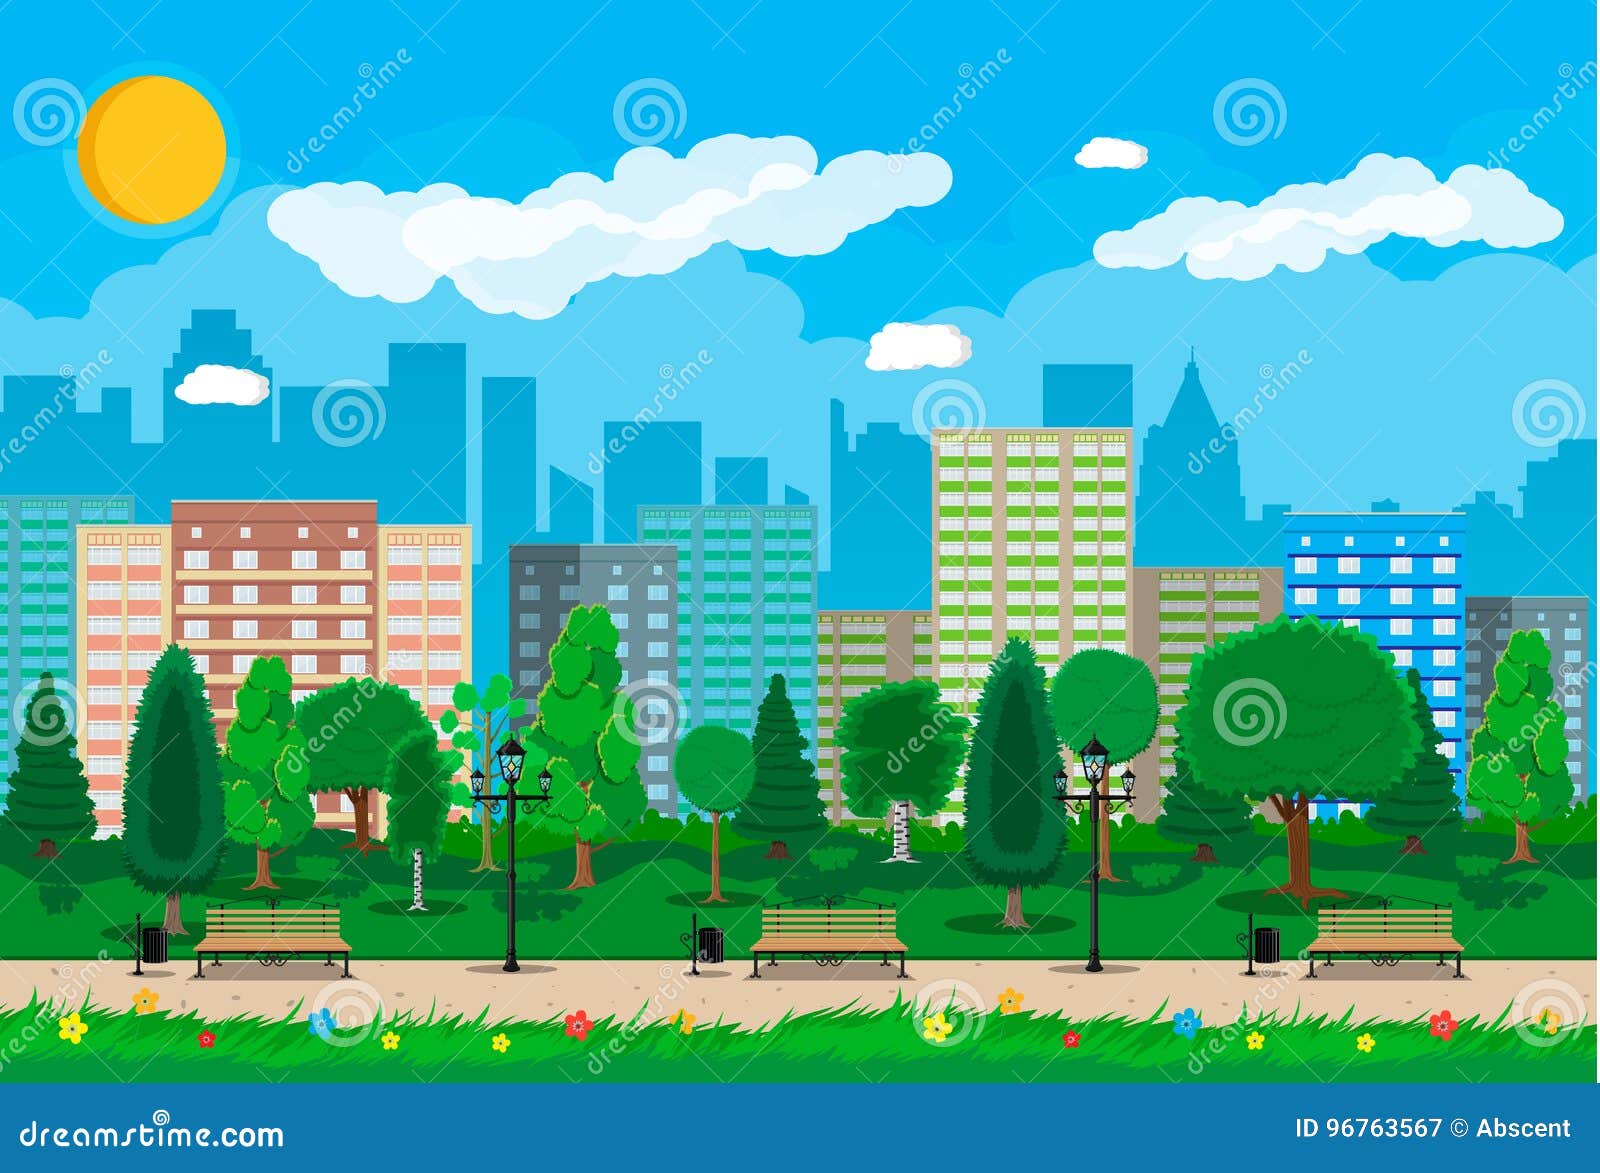 City park concept stock vector. Illustration of alley - 96763567